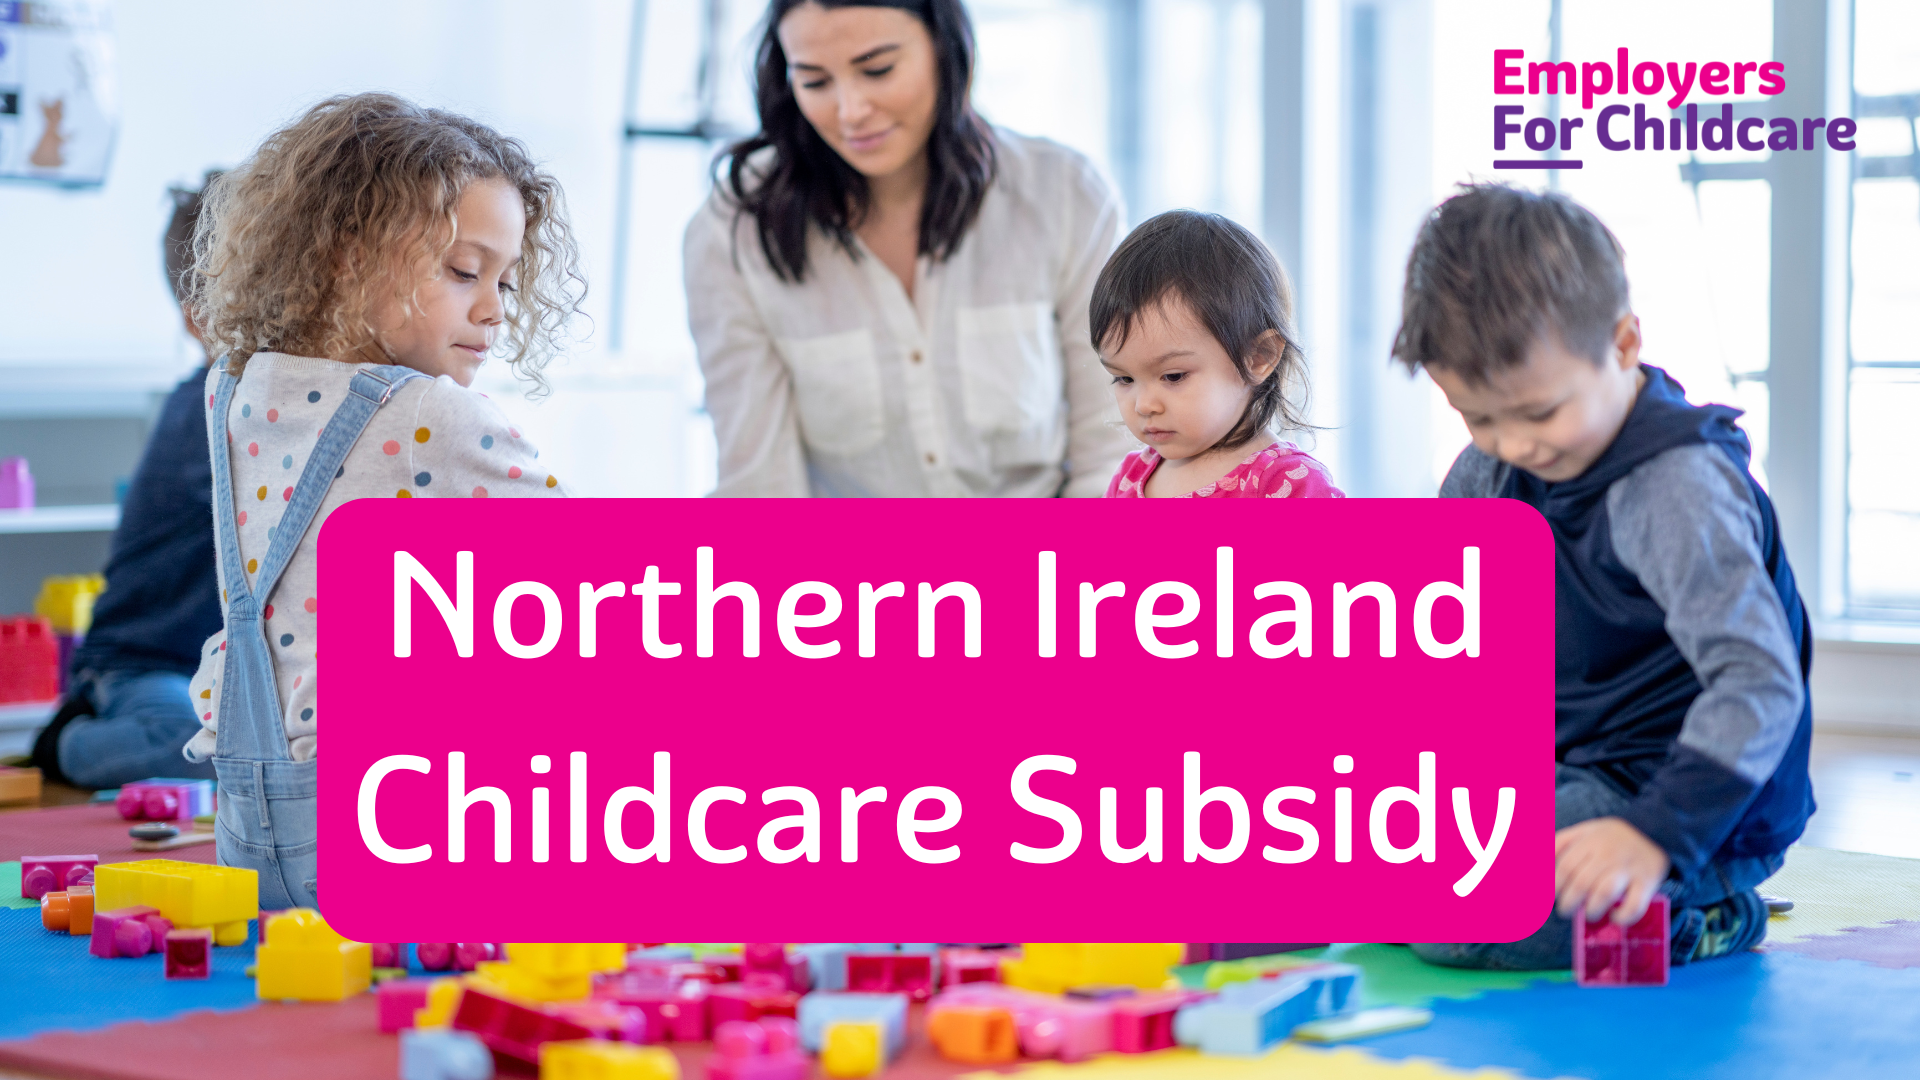 Northern Ireland Childcare Subsidy Scheme – important information for parents